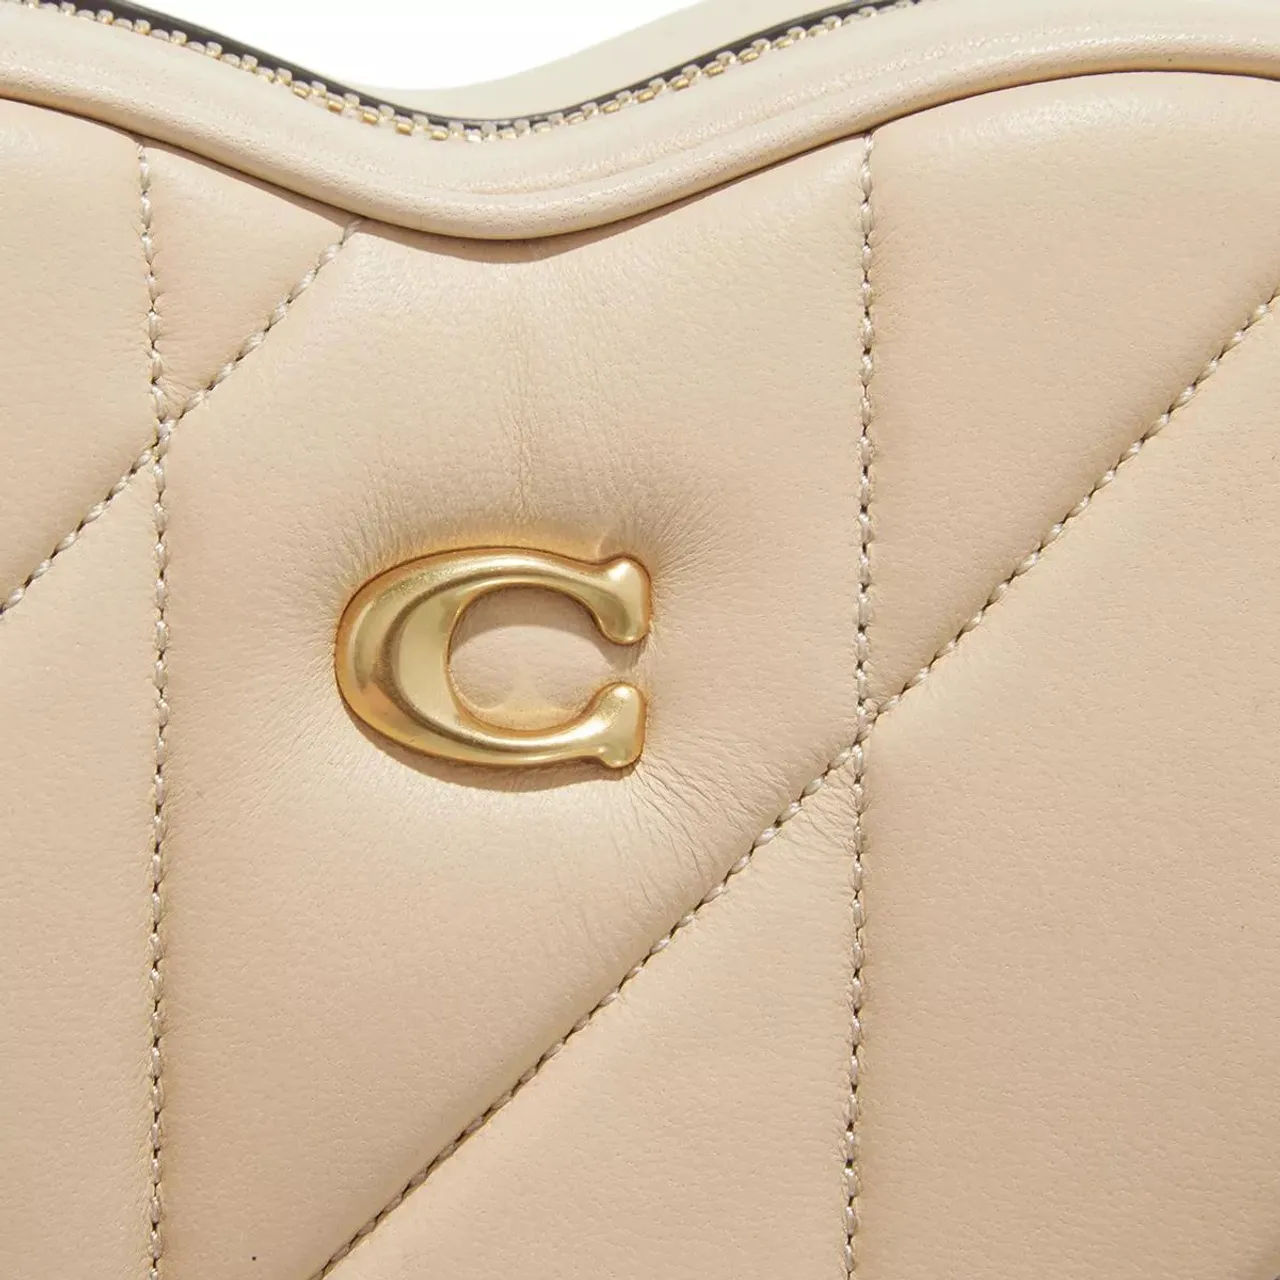 Coach Crossbody Bags - Quilted Leather Heart Crossbody - beige - Crossbody Bags for ladies